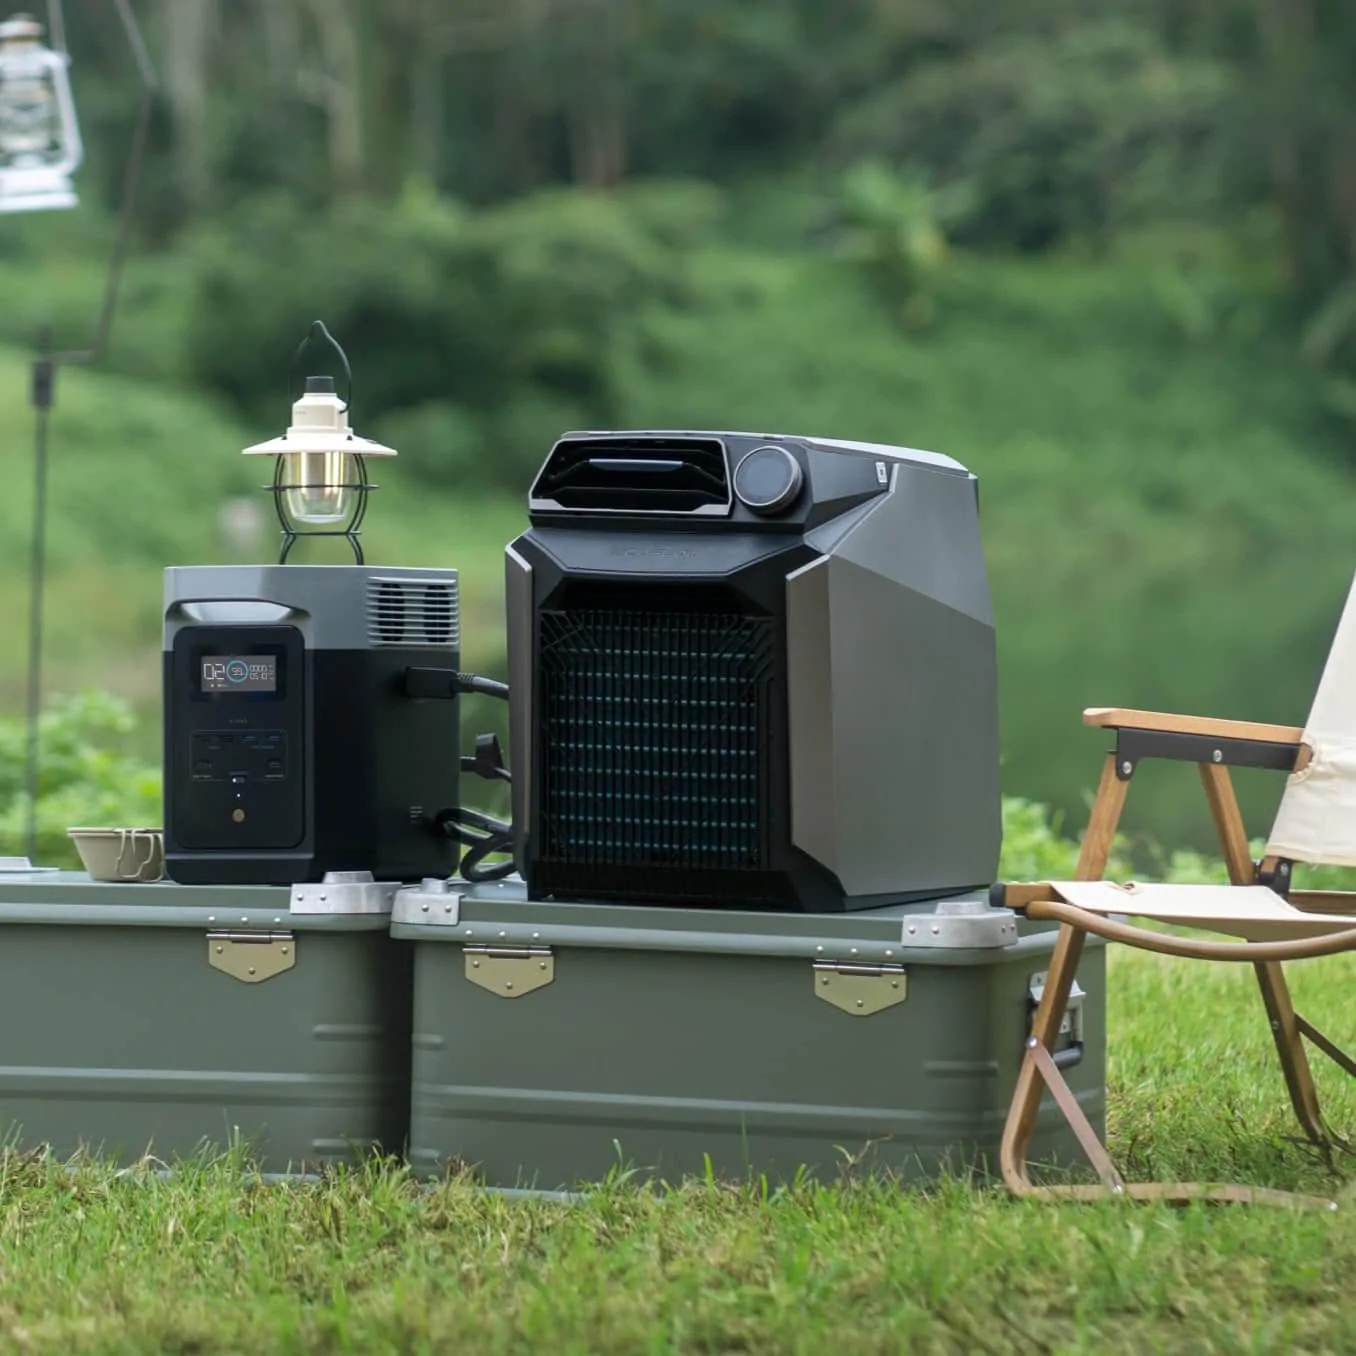 EcoFlow Wave Portable Air Conditioner sits on top of a lawn chair (SHIPS IN 1-2 WEEKS).